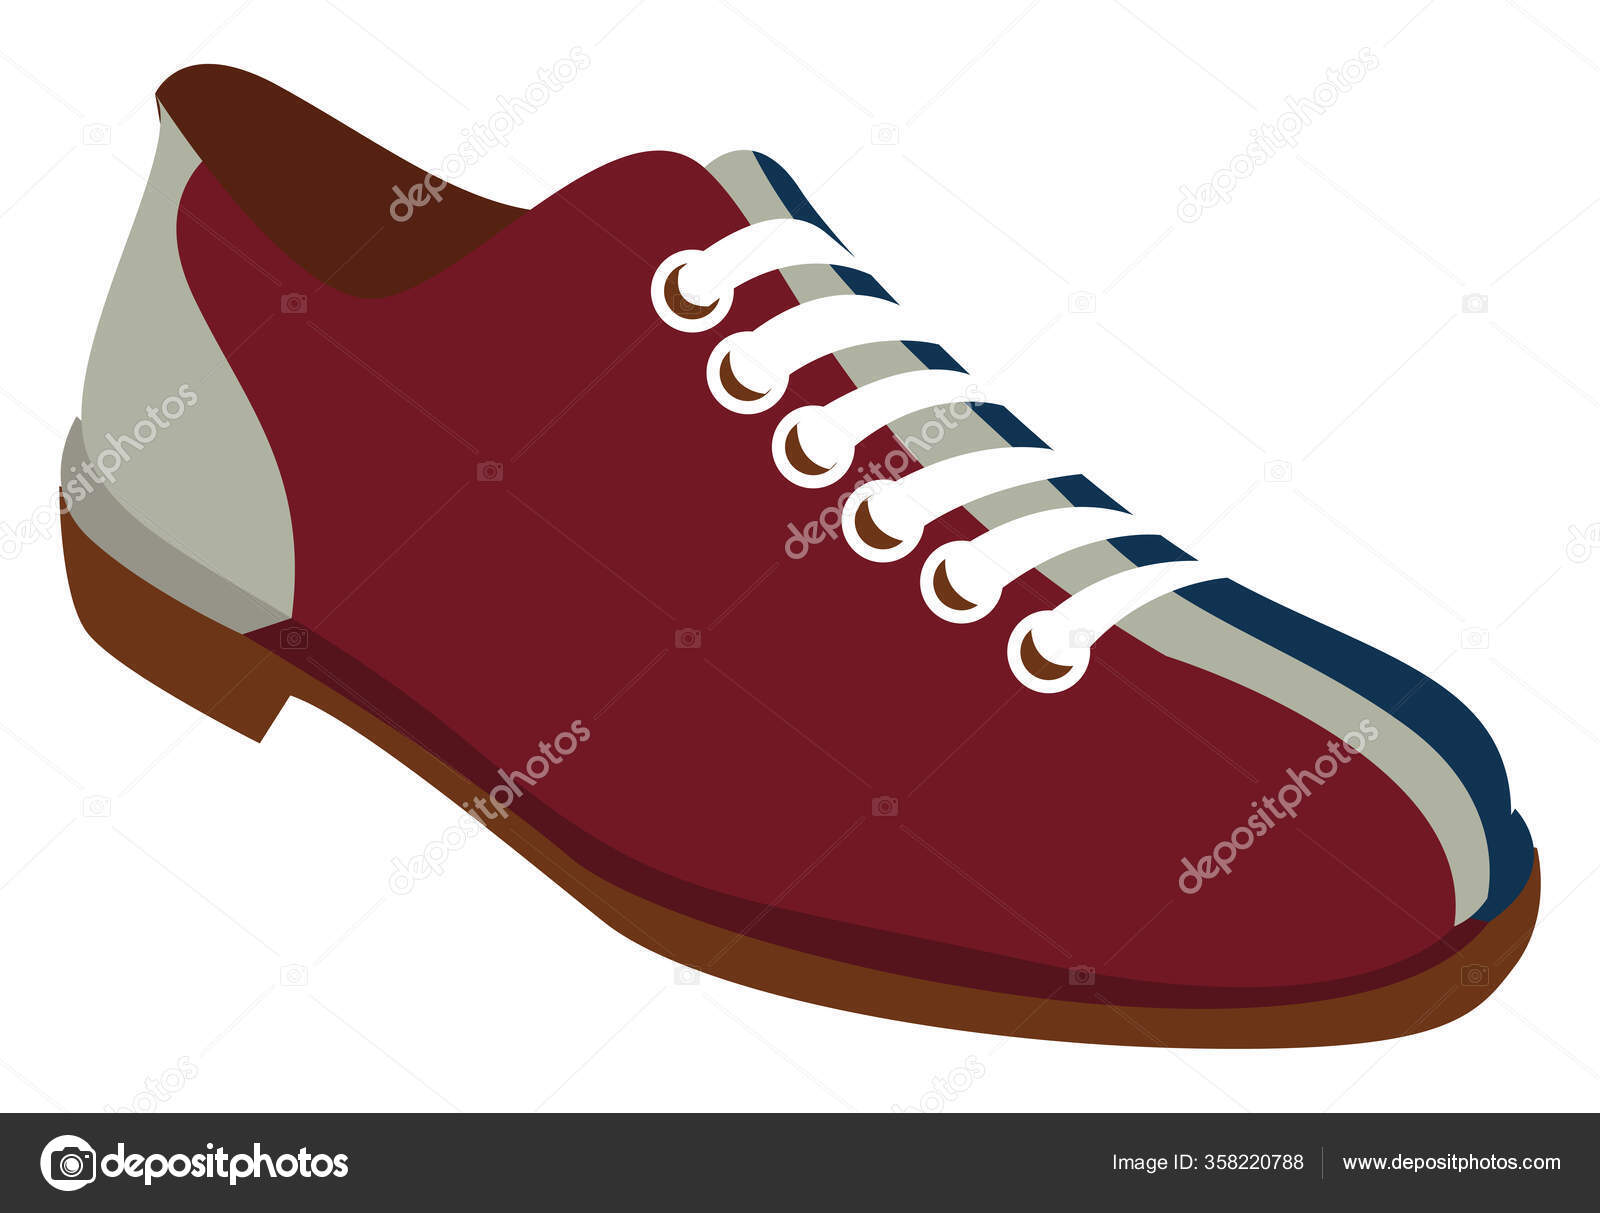 Bowling shoes Vector Art Stock Images | Depositphotos